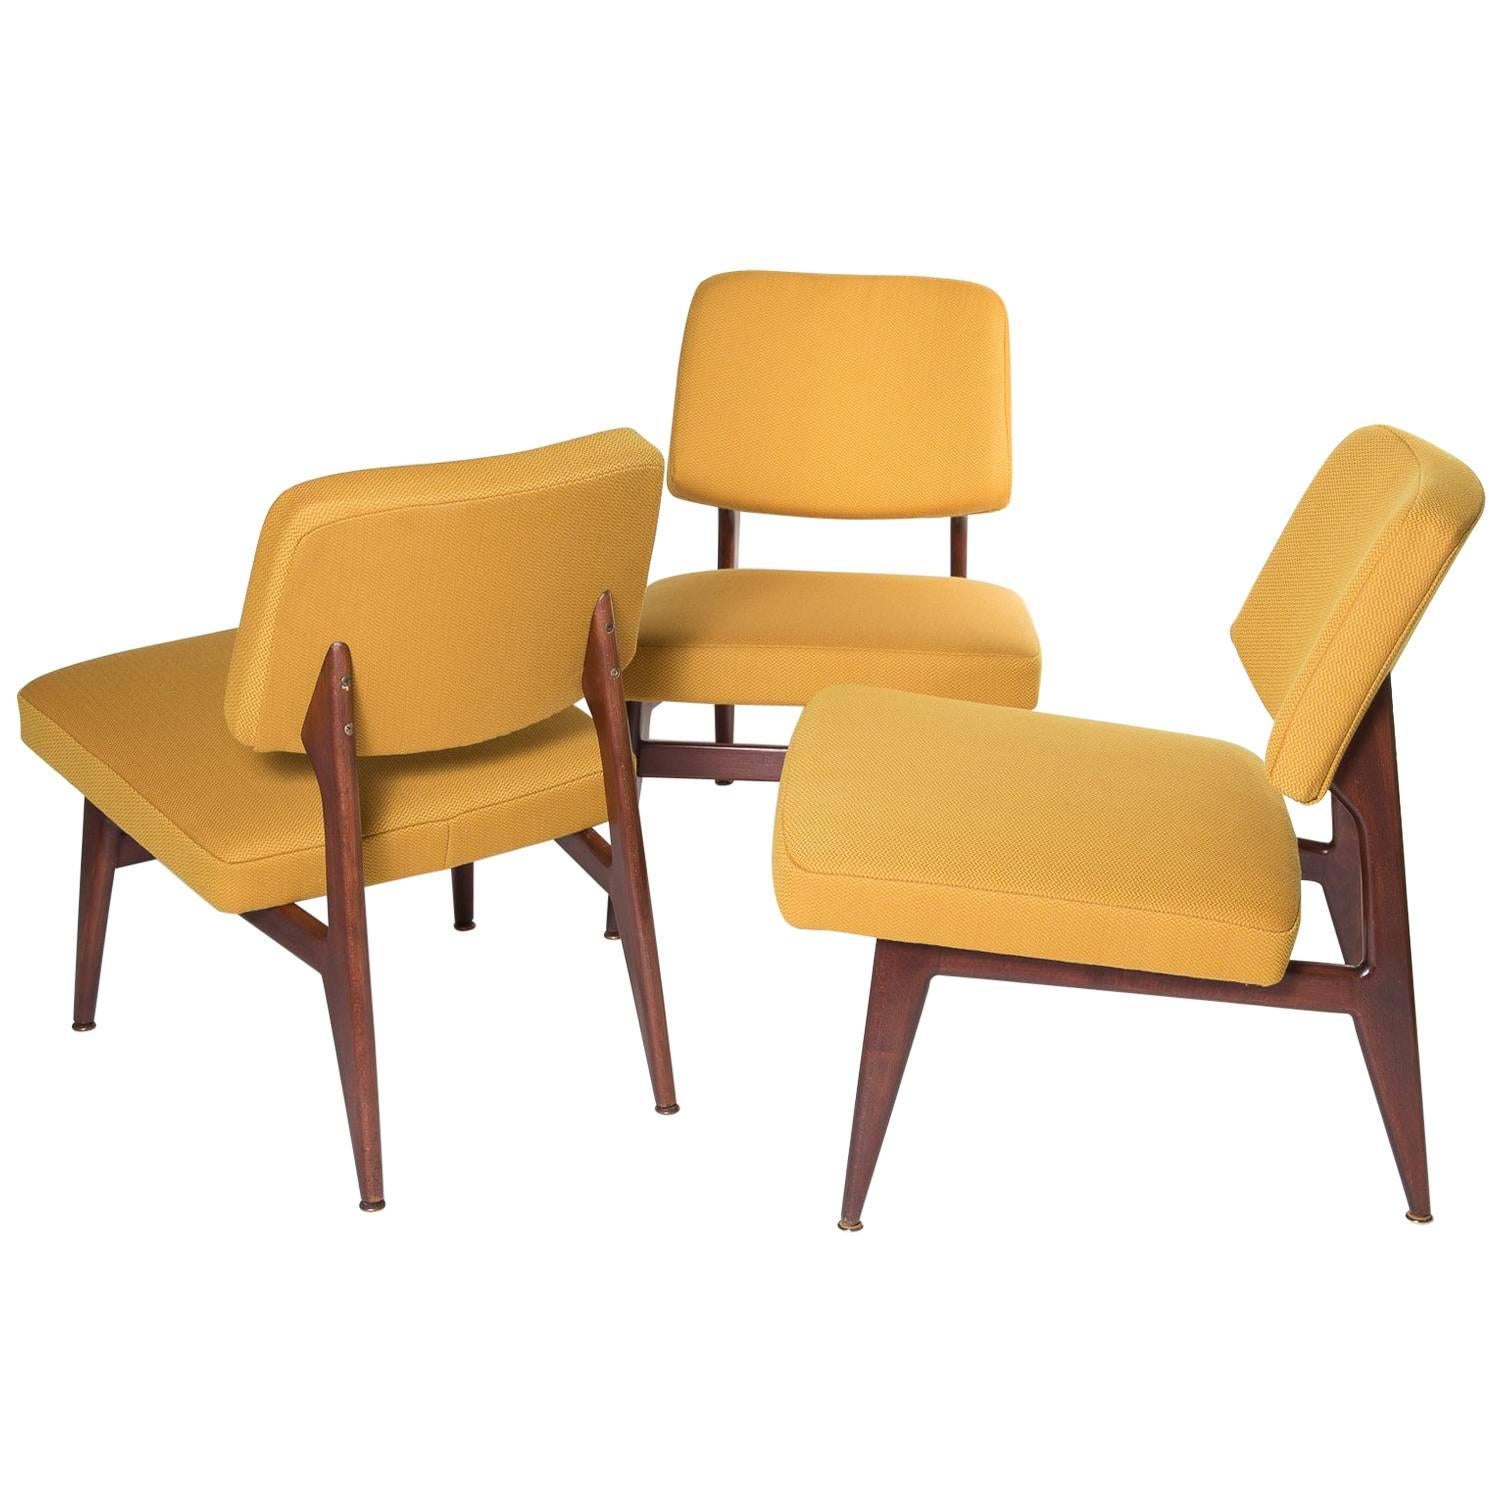 3 Thonet No. 681 Mid-Century Design Chairs Designed 1958 by Eberle, Germany 1965 For Sale